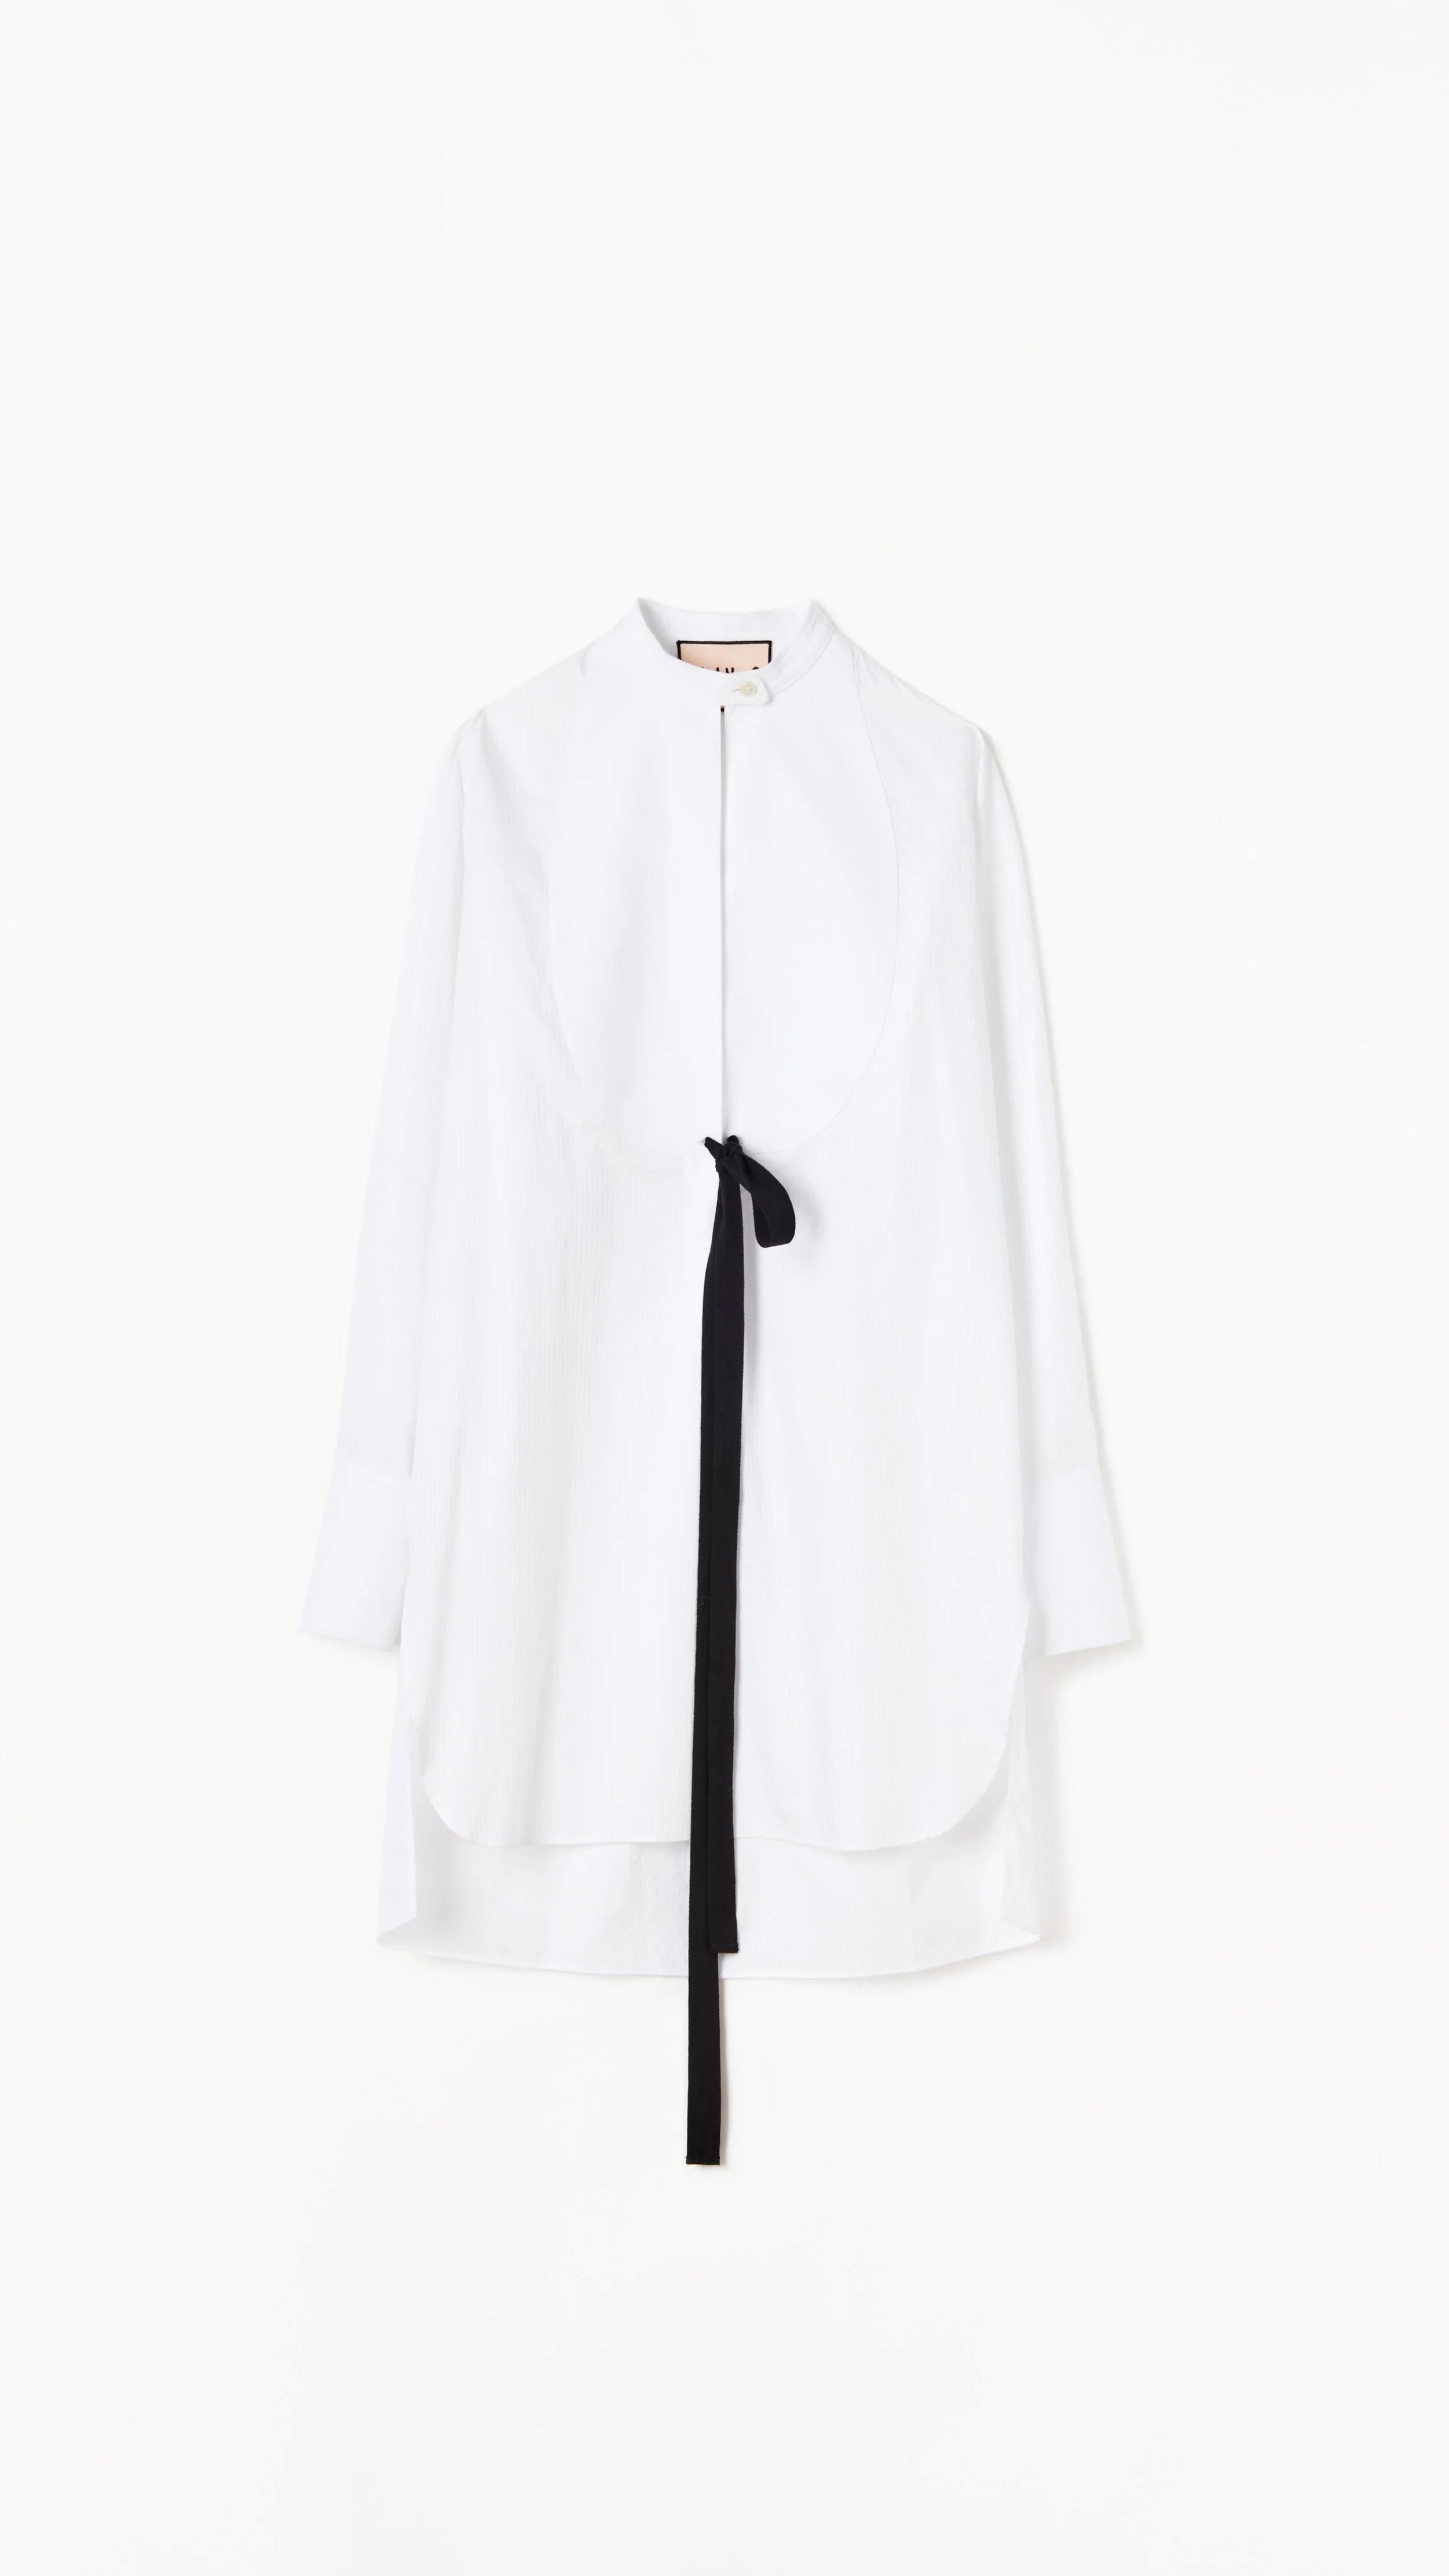 Plan C White Sartorial Poplin Shirt. Classic with a twist long white poplin blouse with front buttons. An added black ribbon detail in the front. Oversized cuffs at the long sleeves. Product photo shown from the front.